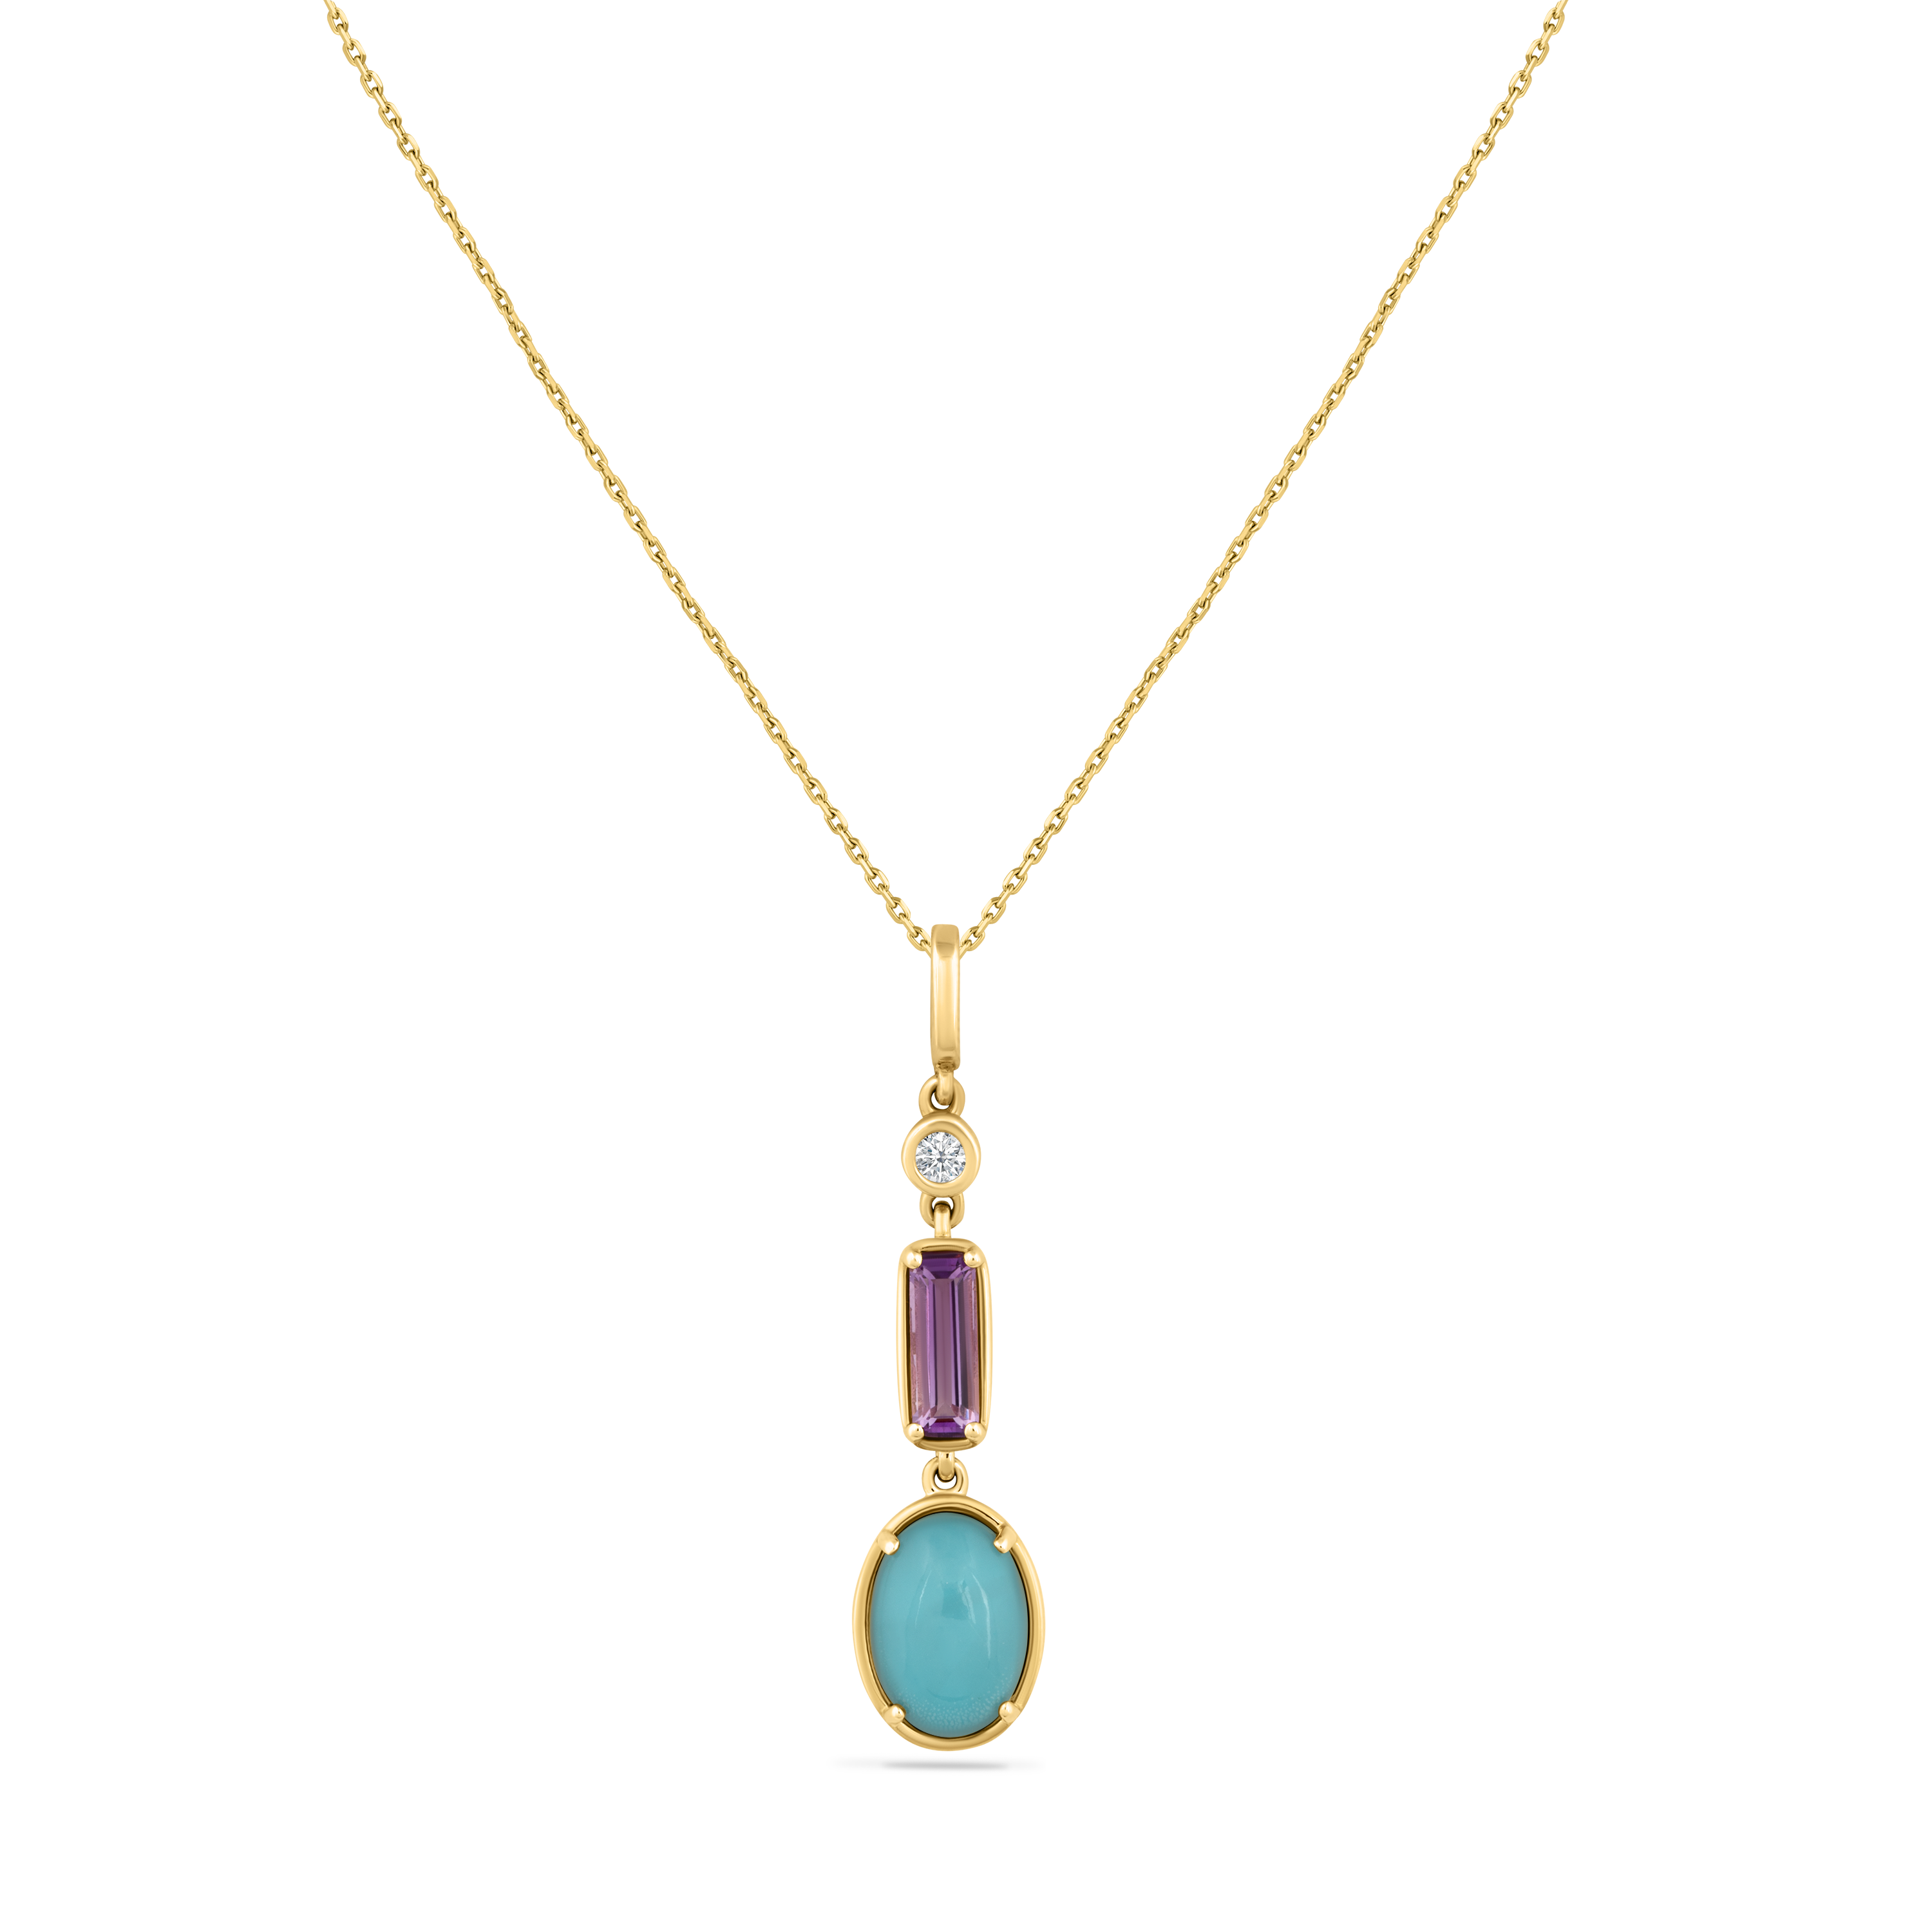 14K DROP PENDANT WITH DIAMOND, AMETHYST, DOUBLET WHITE TOPAZ & RECON TURQUOISE ON 18 INCHES CABLE CHAIN